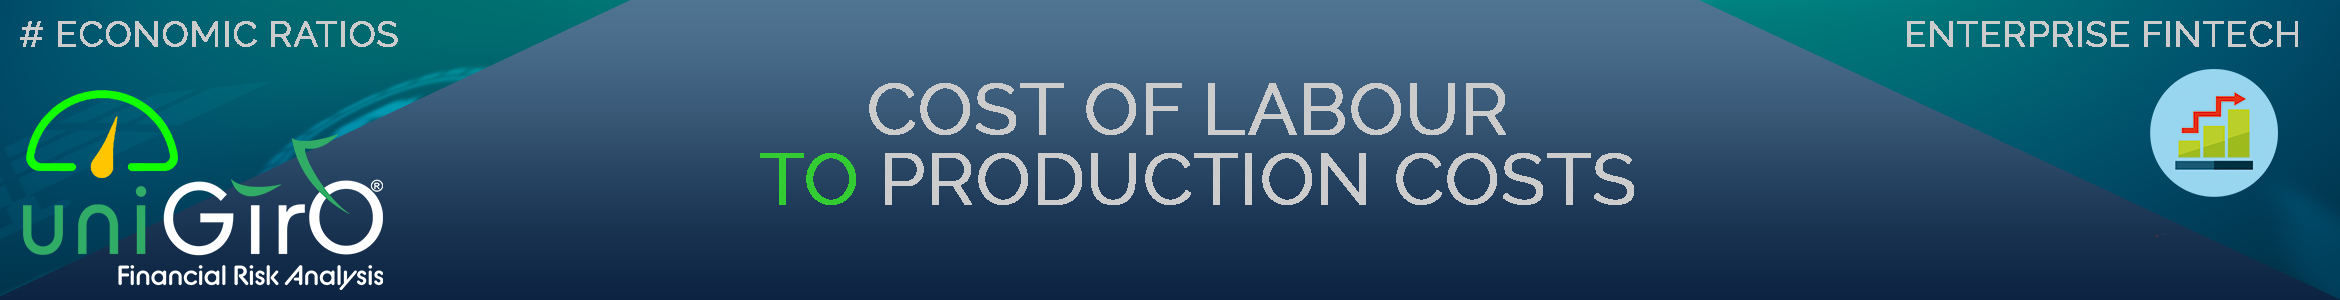 Cost of Labour / Production Costs 